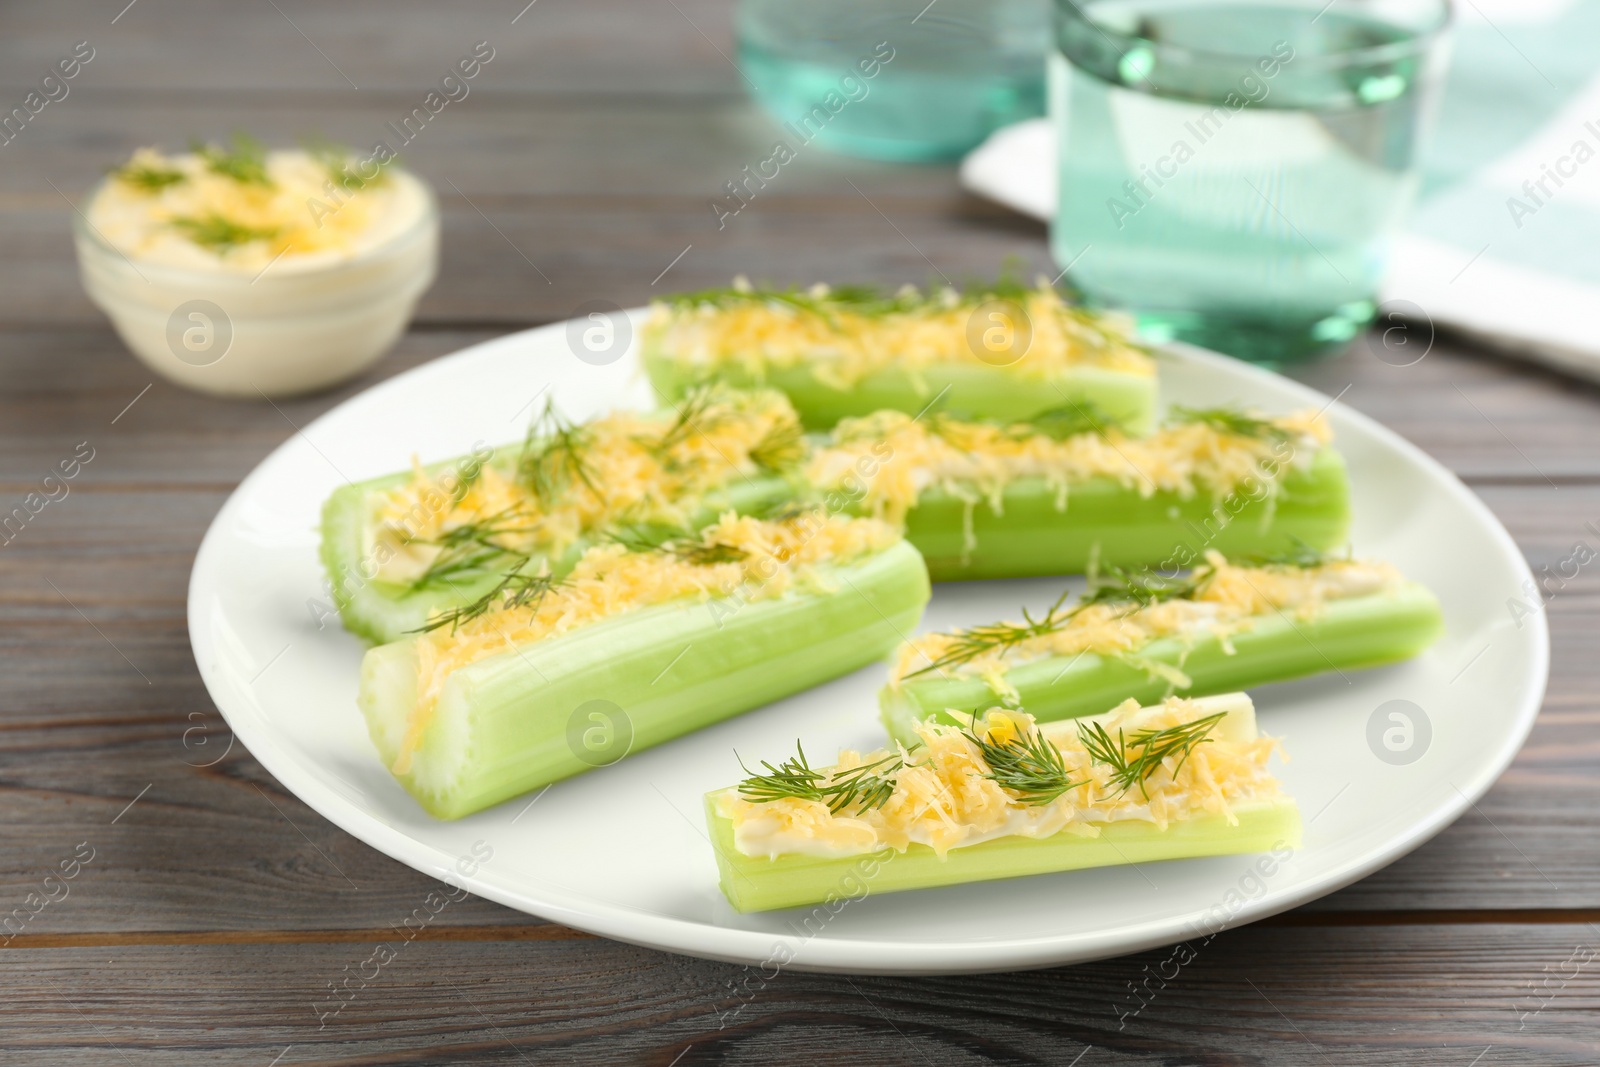 Photo of Celery sticks with sauce, cheese and dill on wooden table